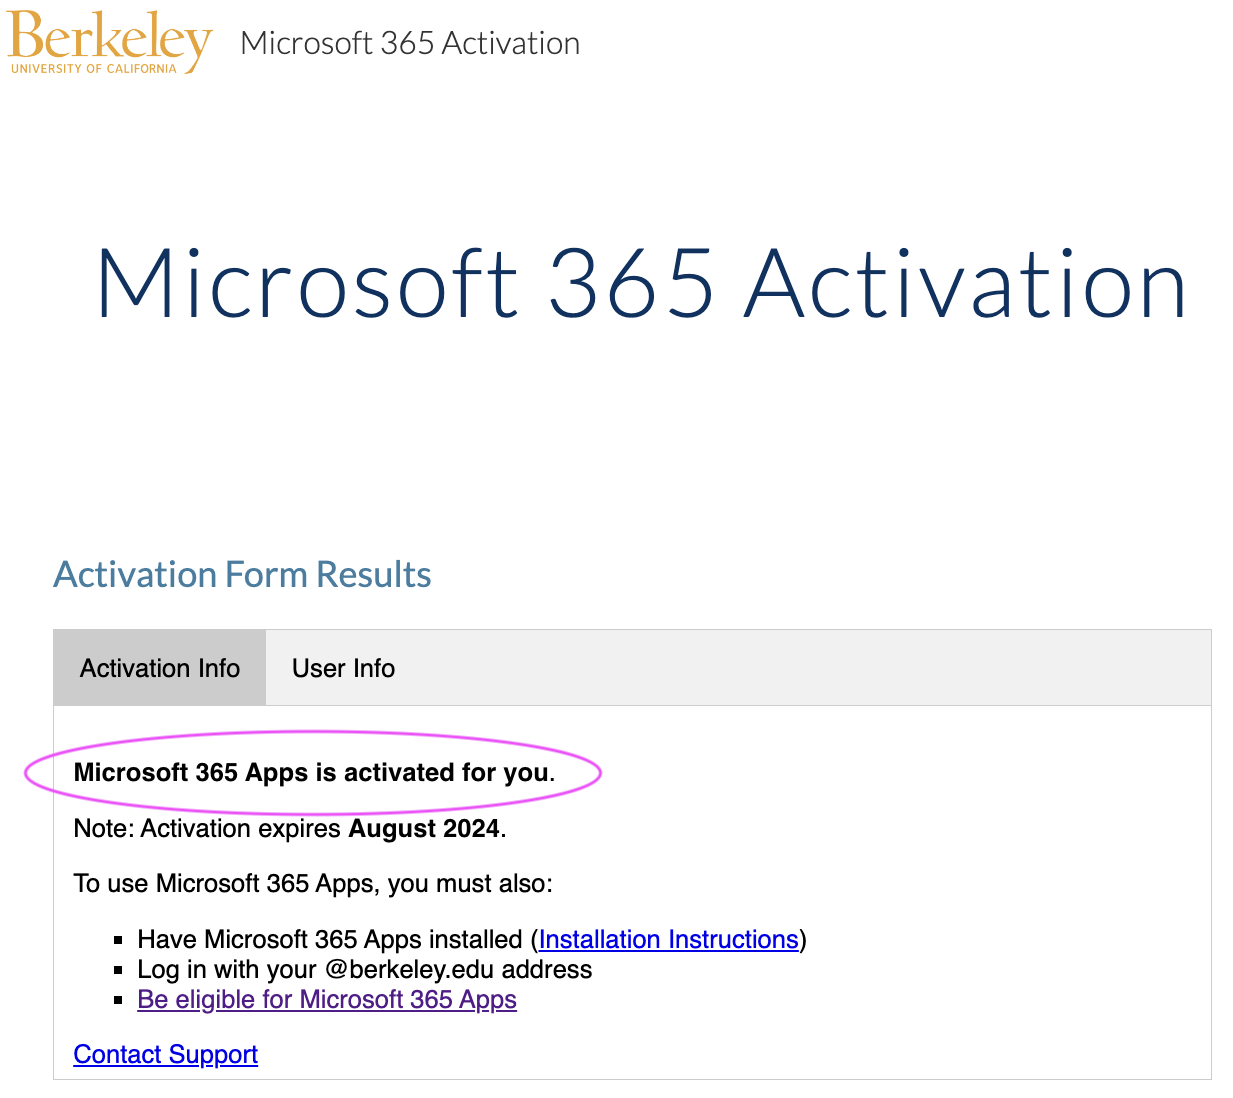 Microsoft 365 Apps is activated for you